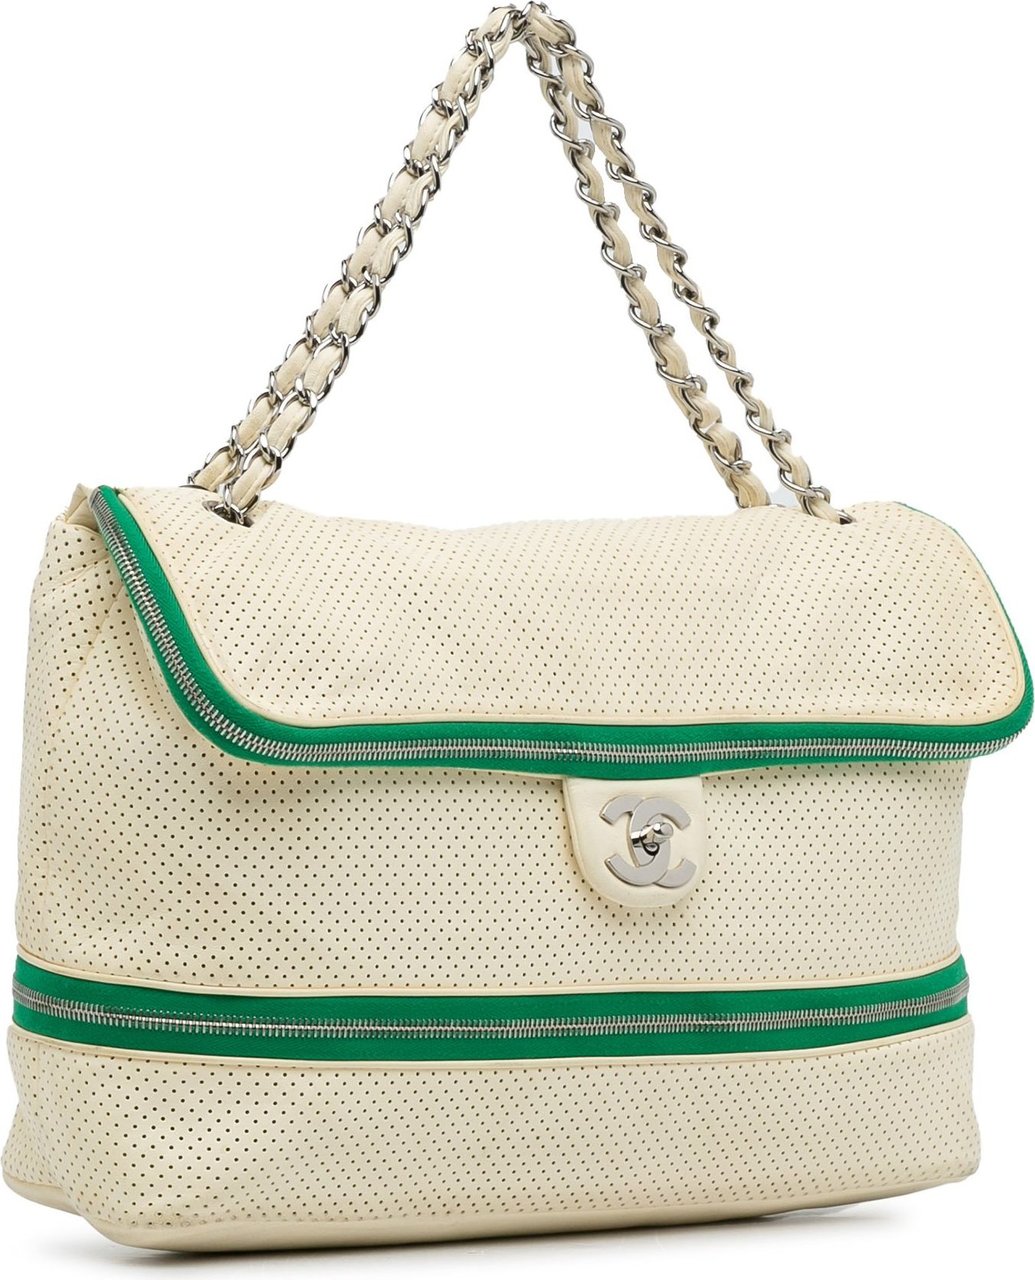 Chanel Perforated Expandable Shoulder Bag Wit